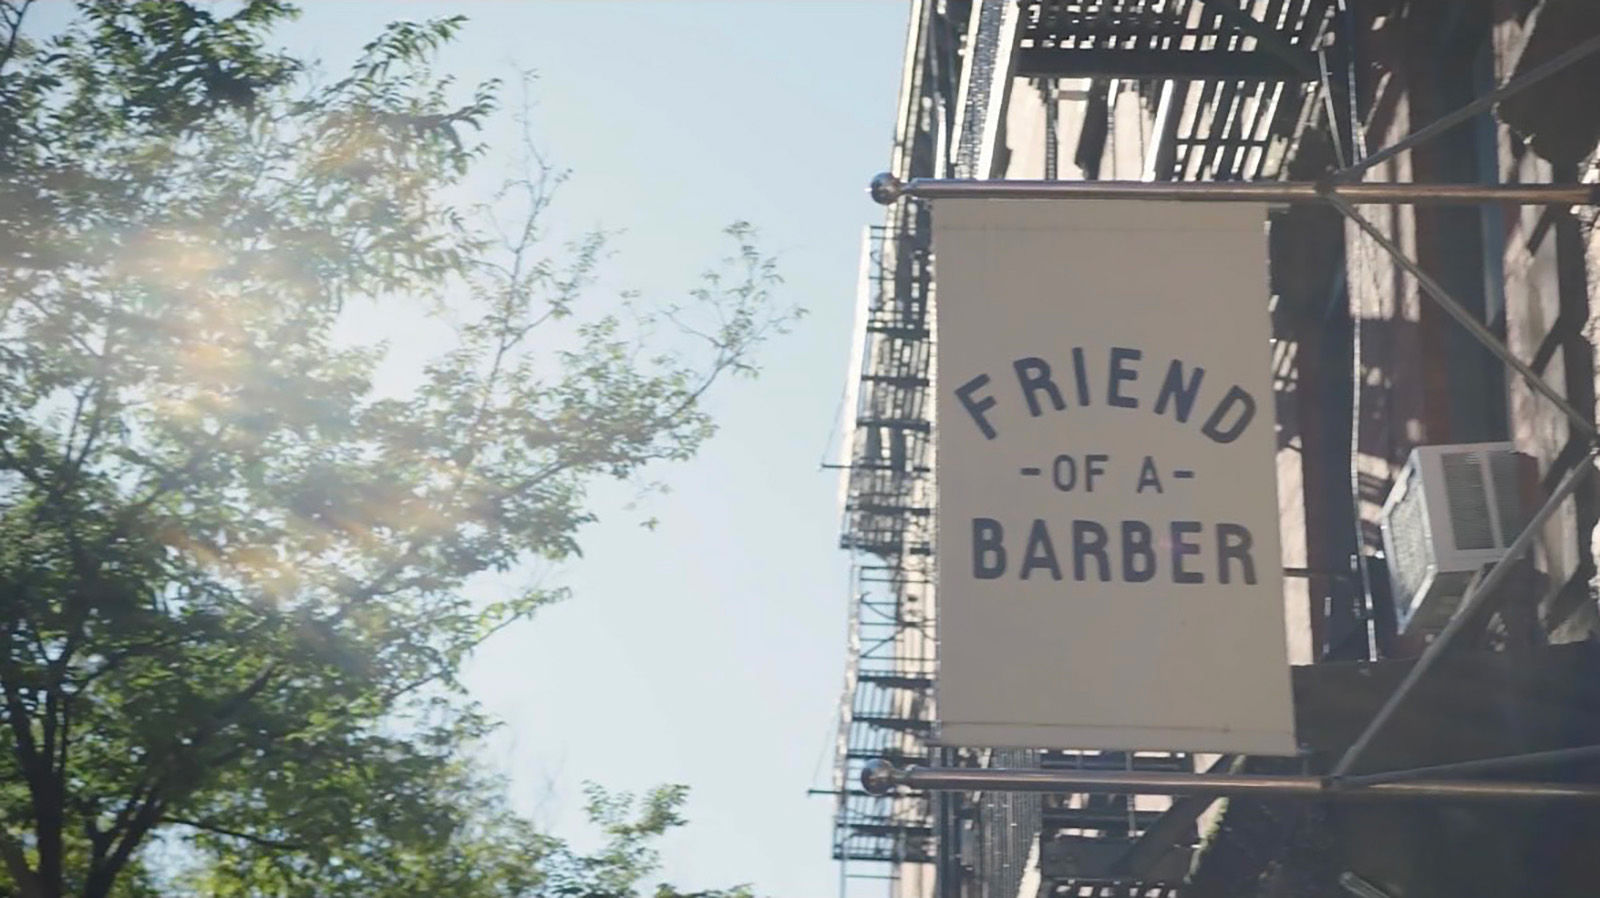 White sign with blue letters that reads "Friend of a Barber."